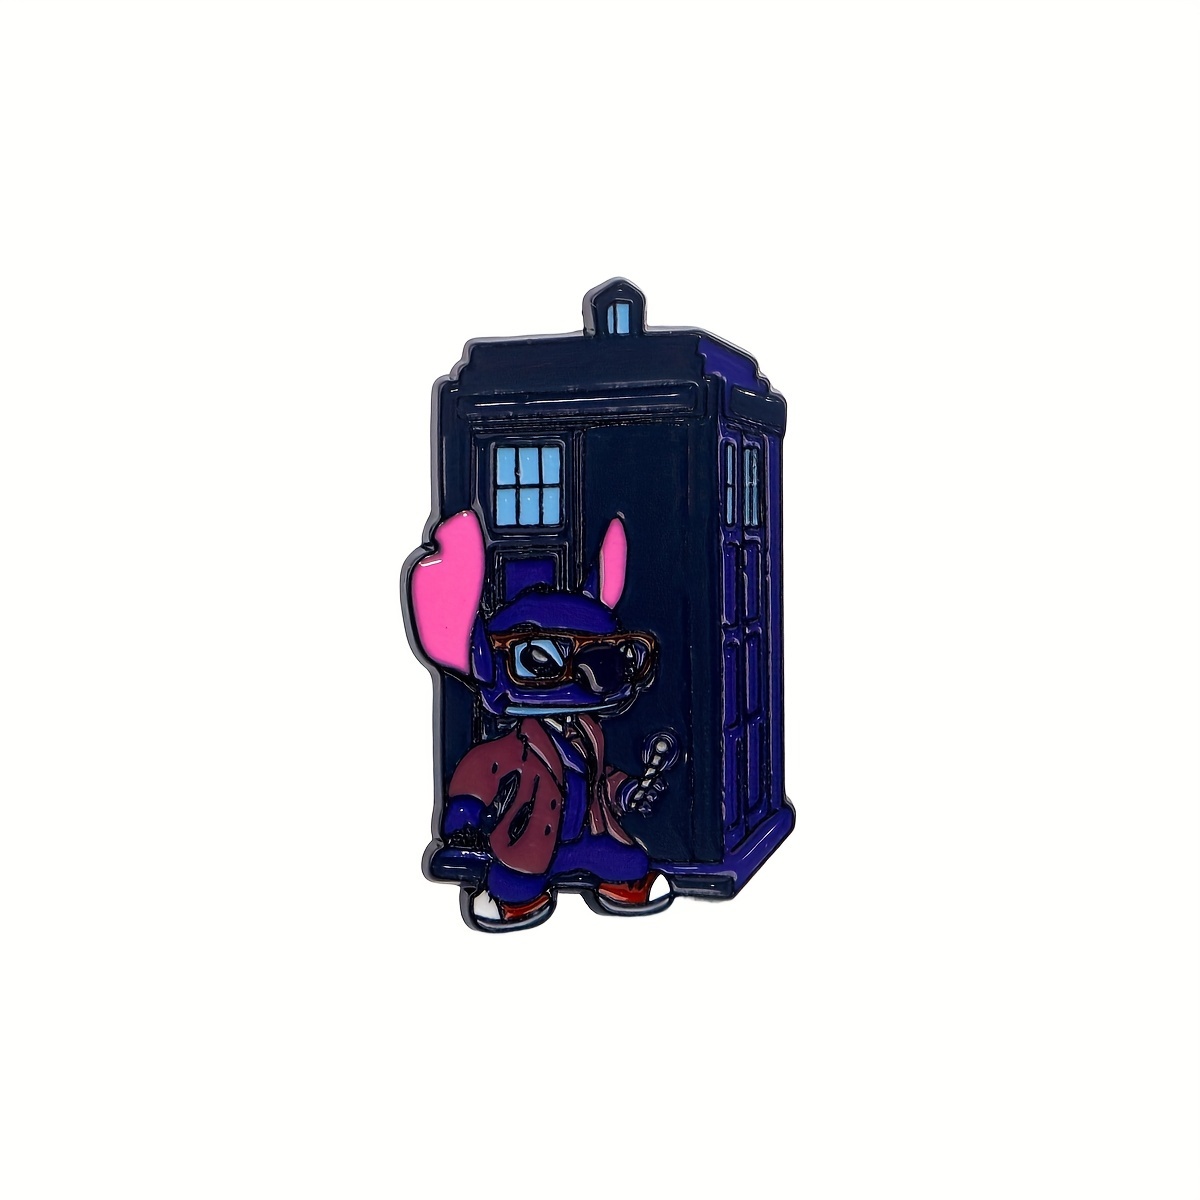 

1pc, Cute Character Enamel Pin For Men, Tardis With Character Design Pin, Stylish Pin Badge For Backpacks And Clothing, Collectible Fashion Accessory Gift For Fans